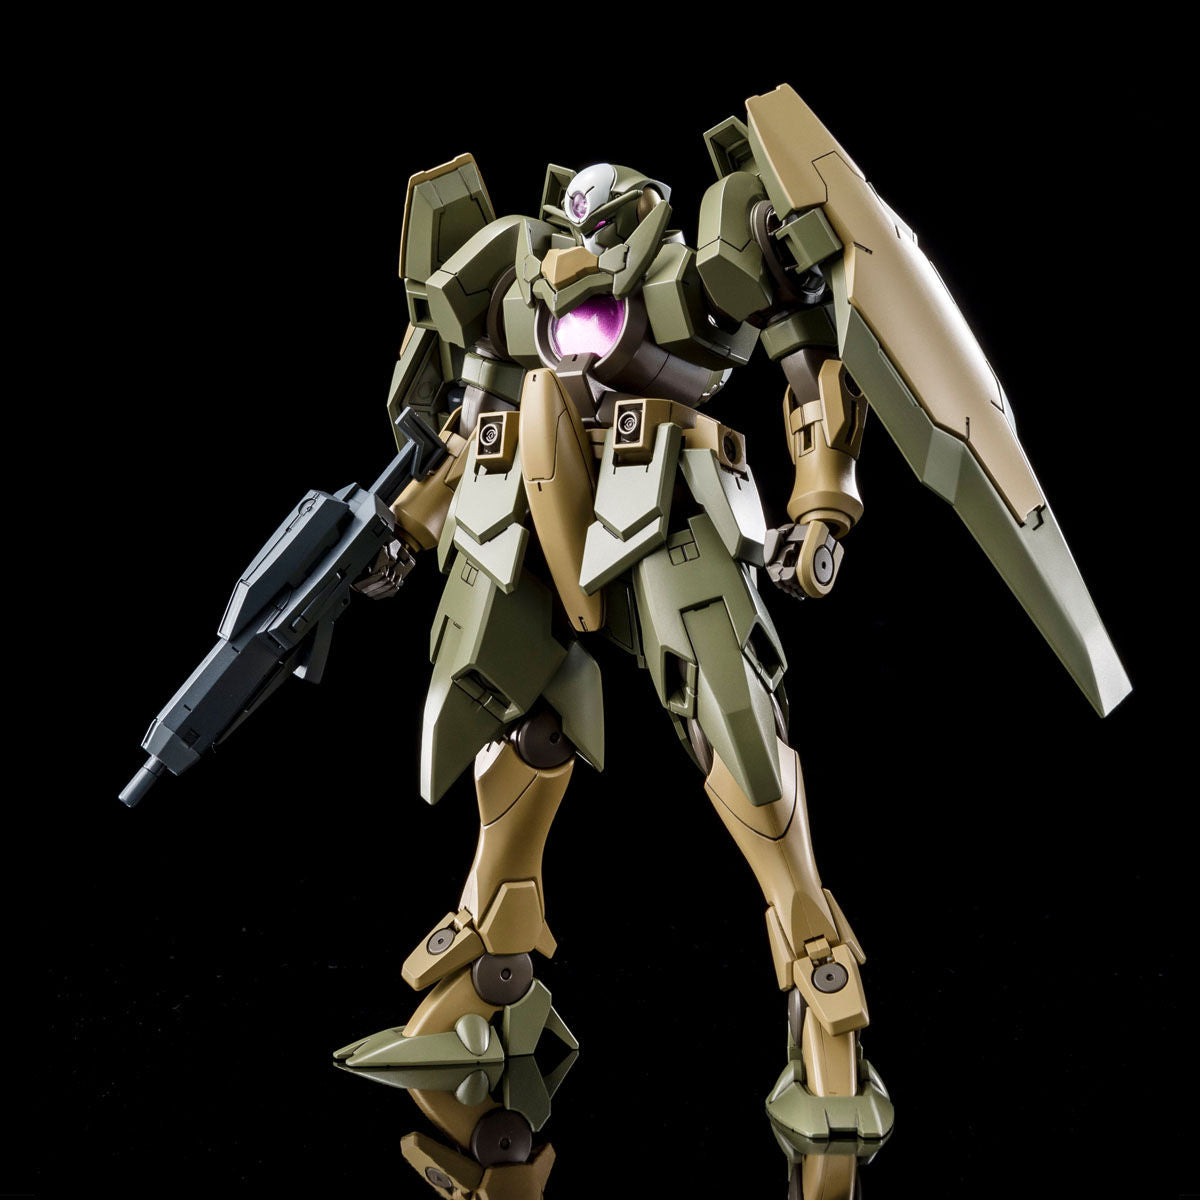 Gundam 1/144 HGBF GN-XIV (GNX 4) Type GBF Renato Brothers' Mobile Suit Build Fighters Model Kit Exclusive